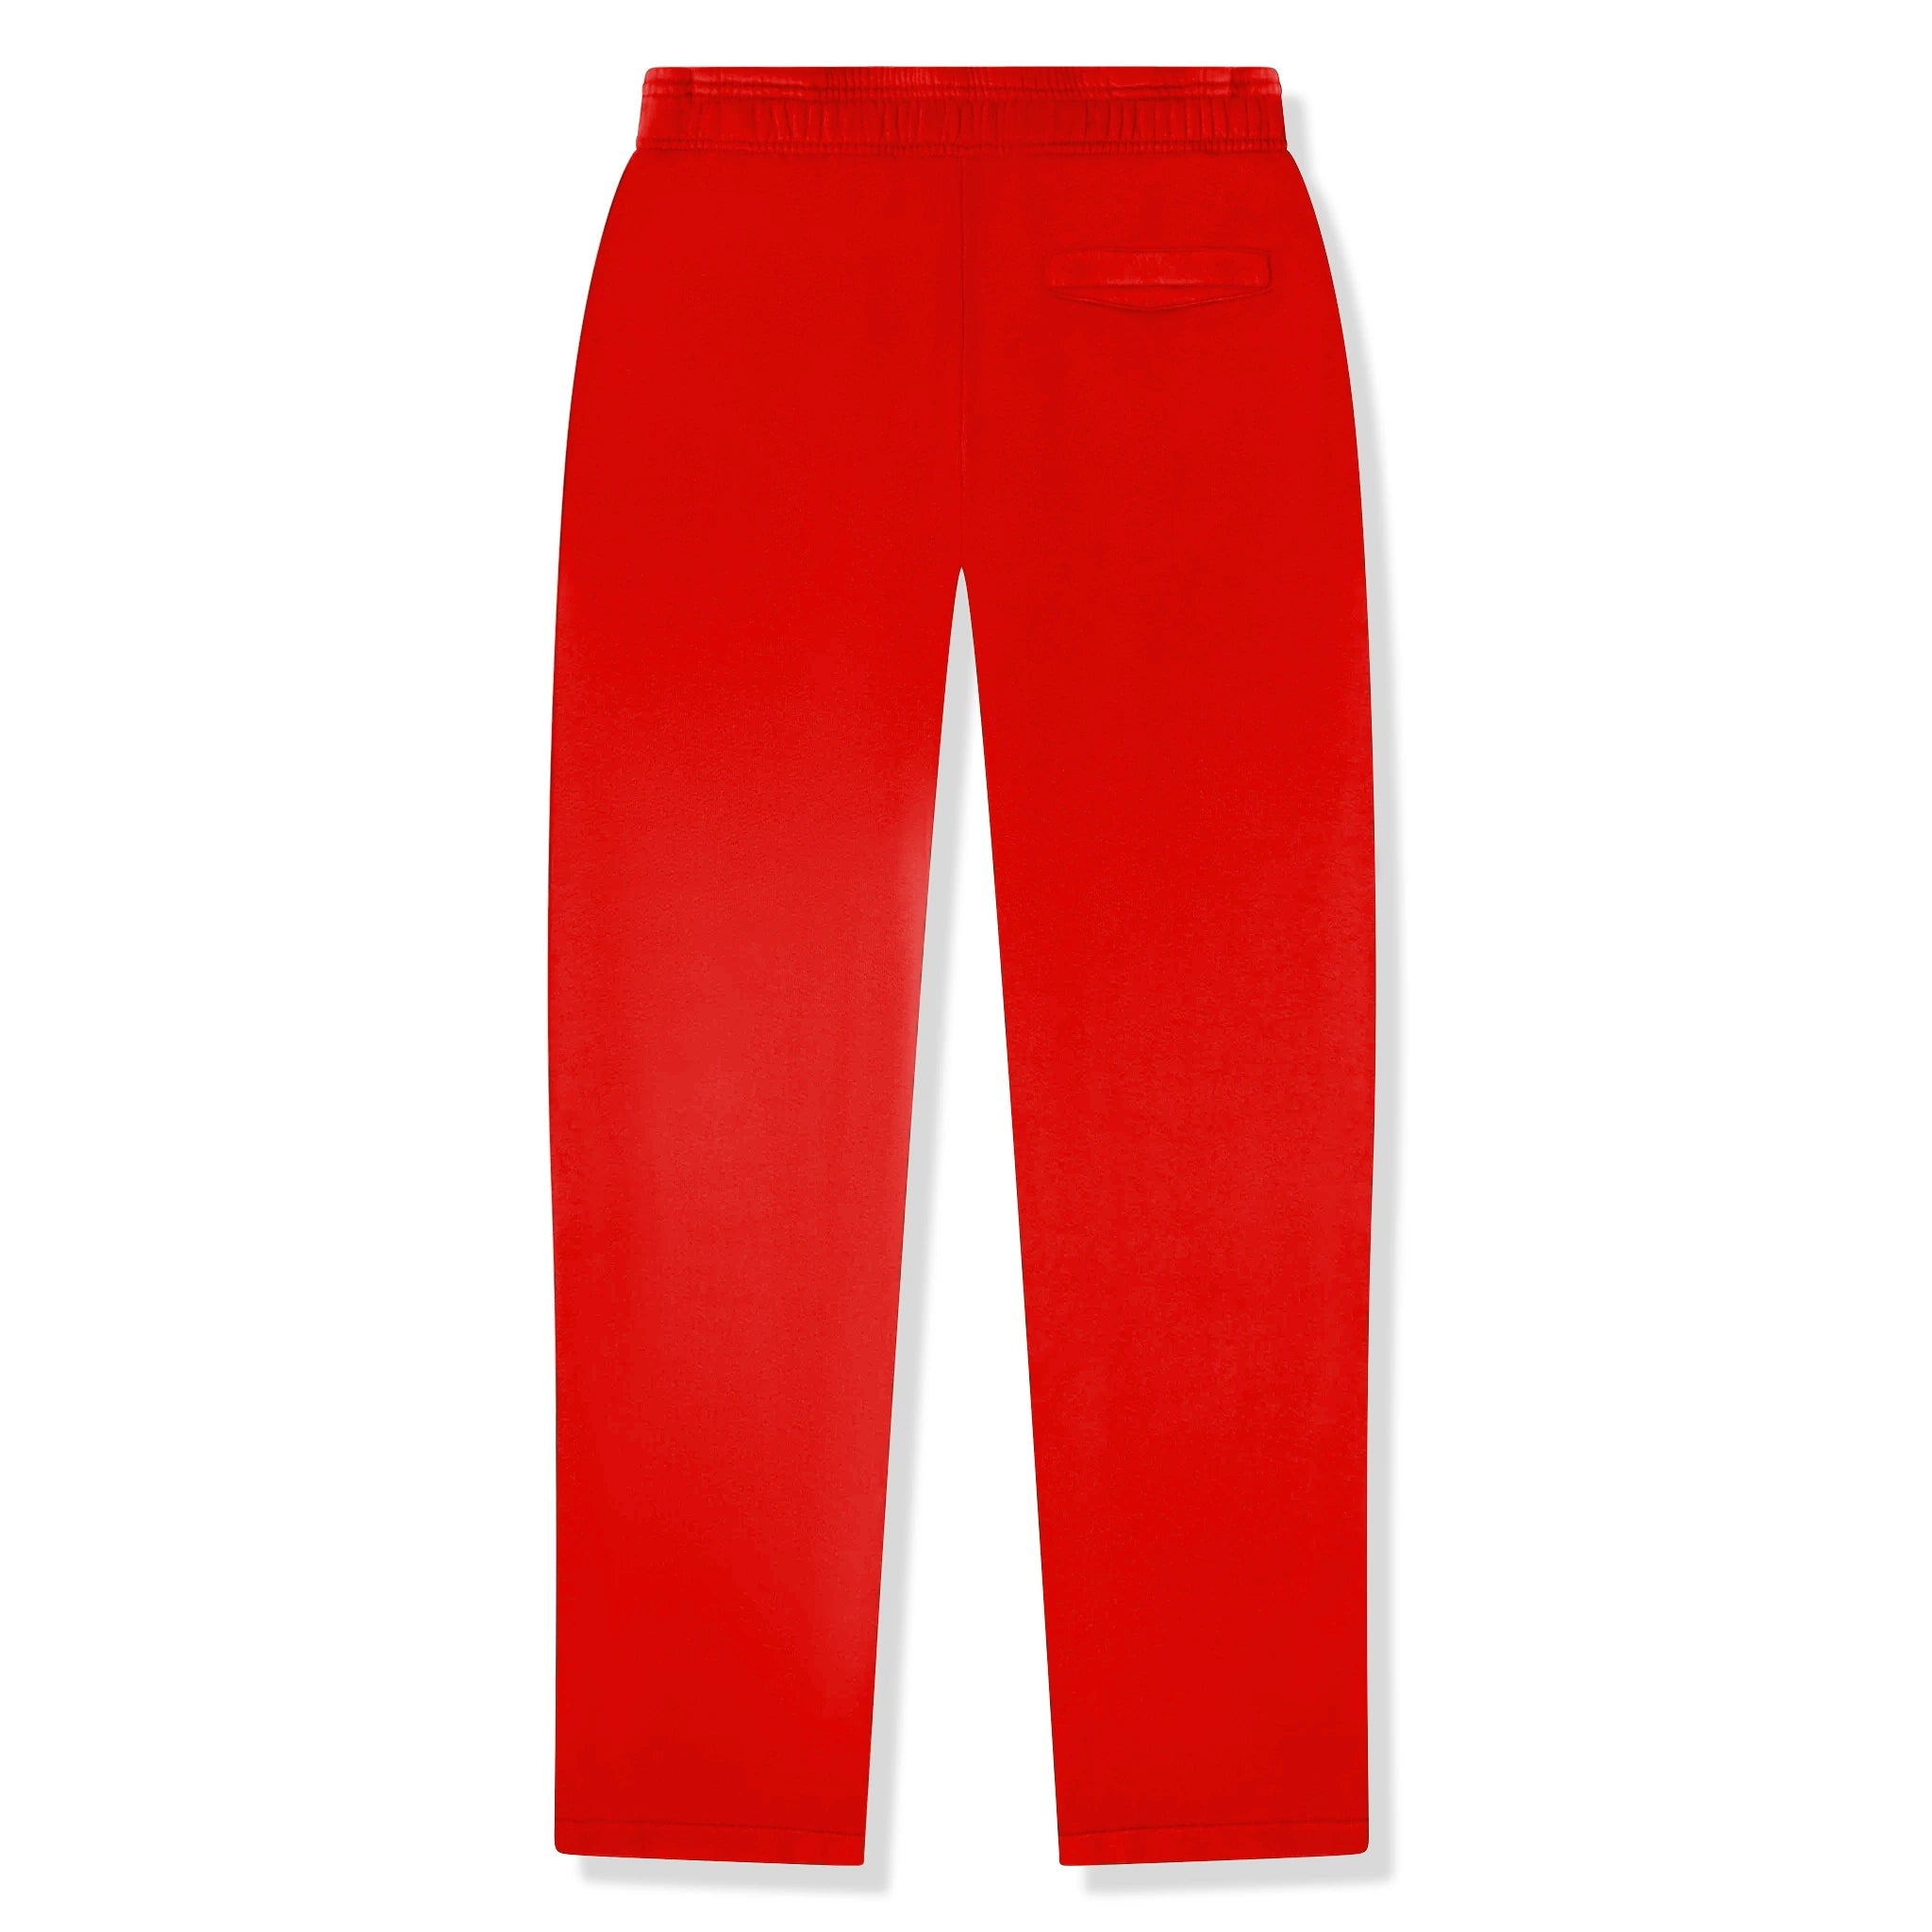 Back view of Eric Emanuel EE Basic Red Sweatpants